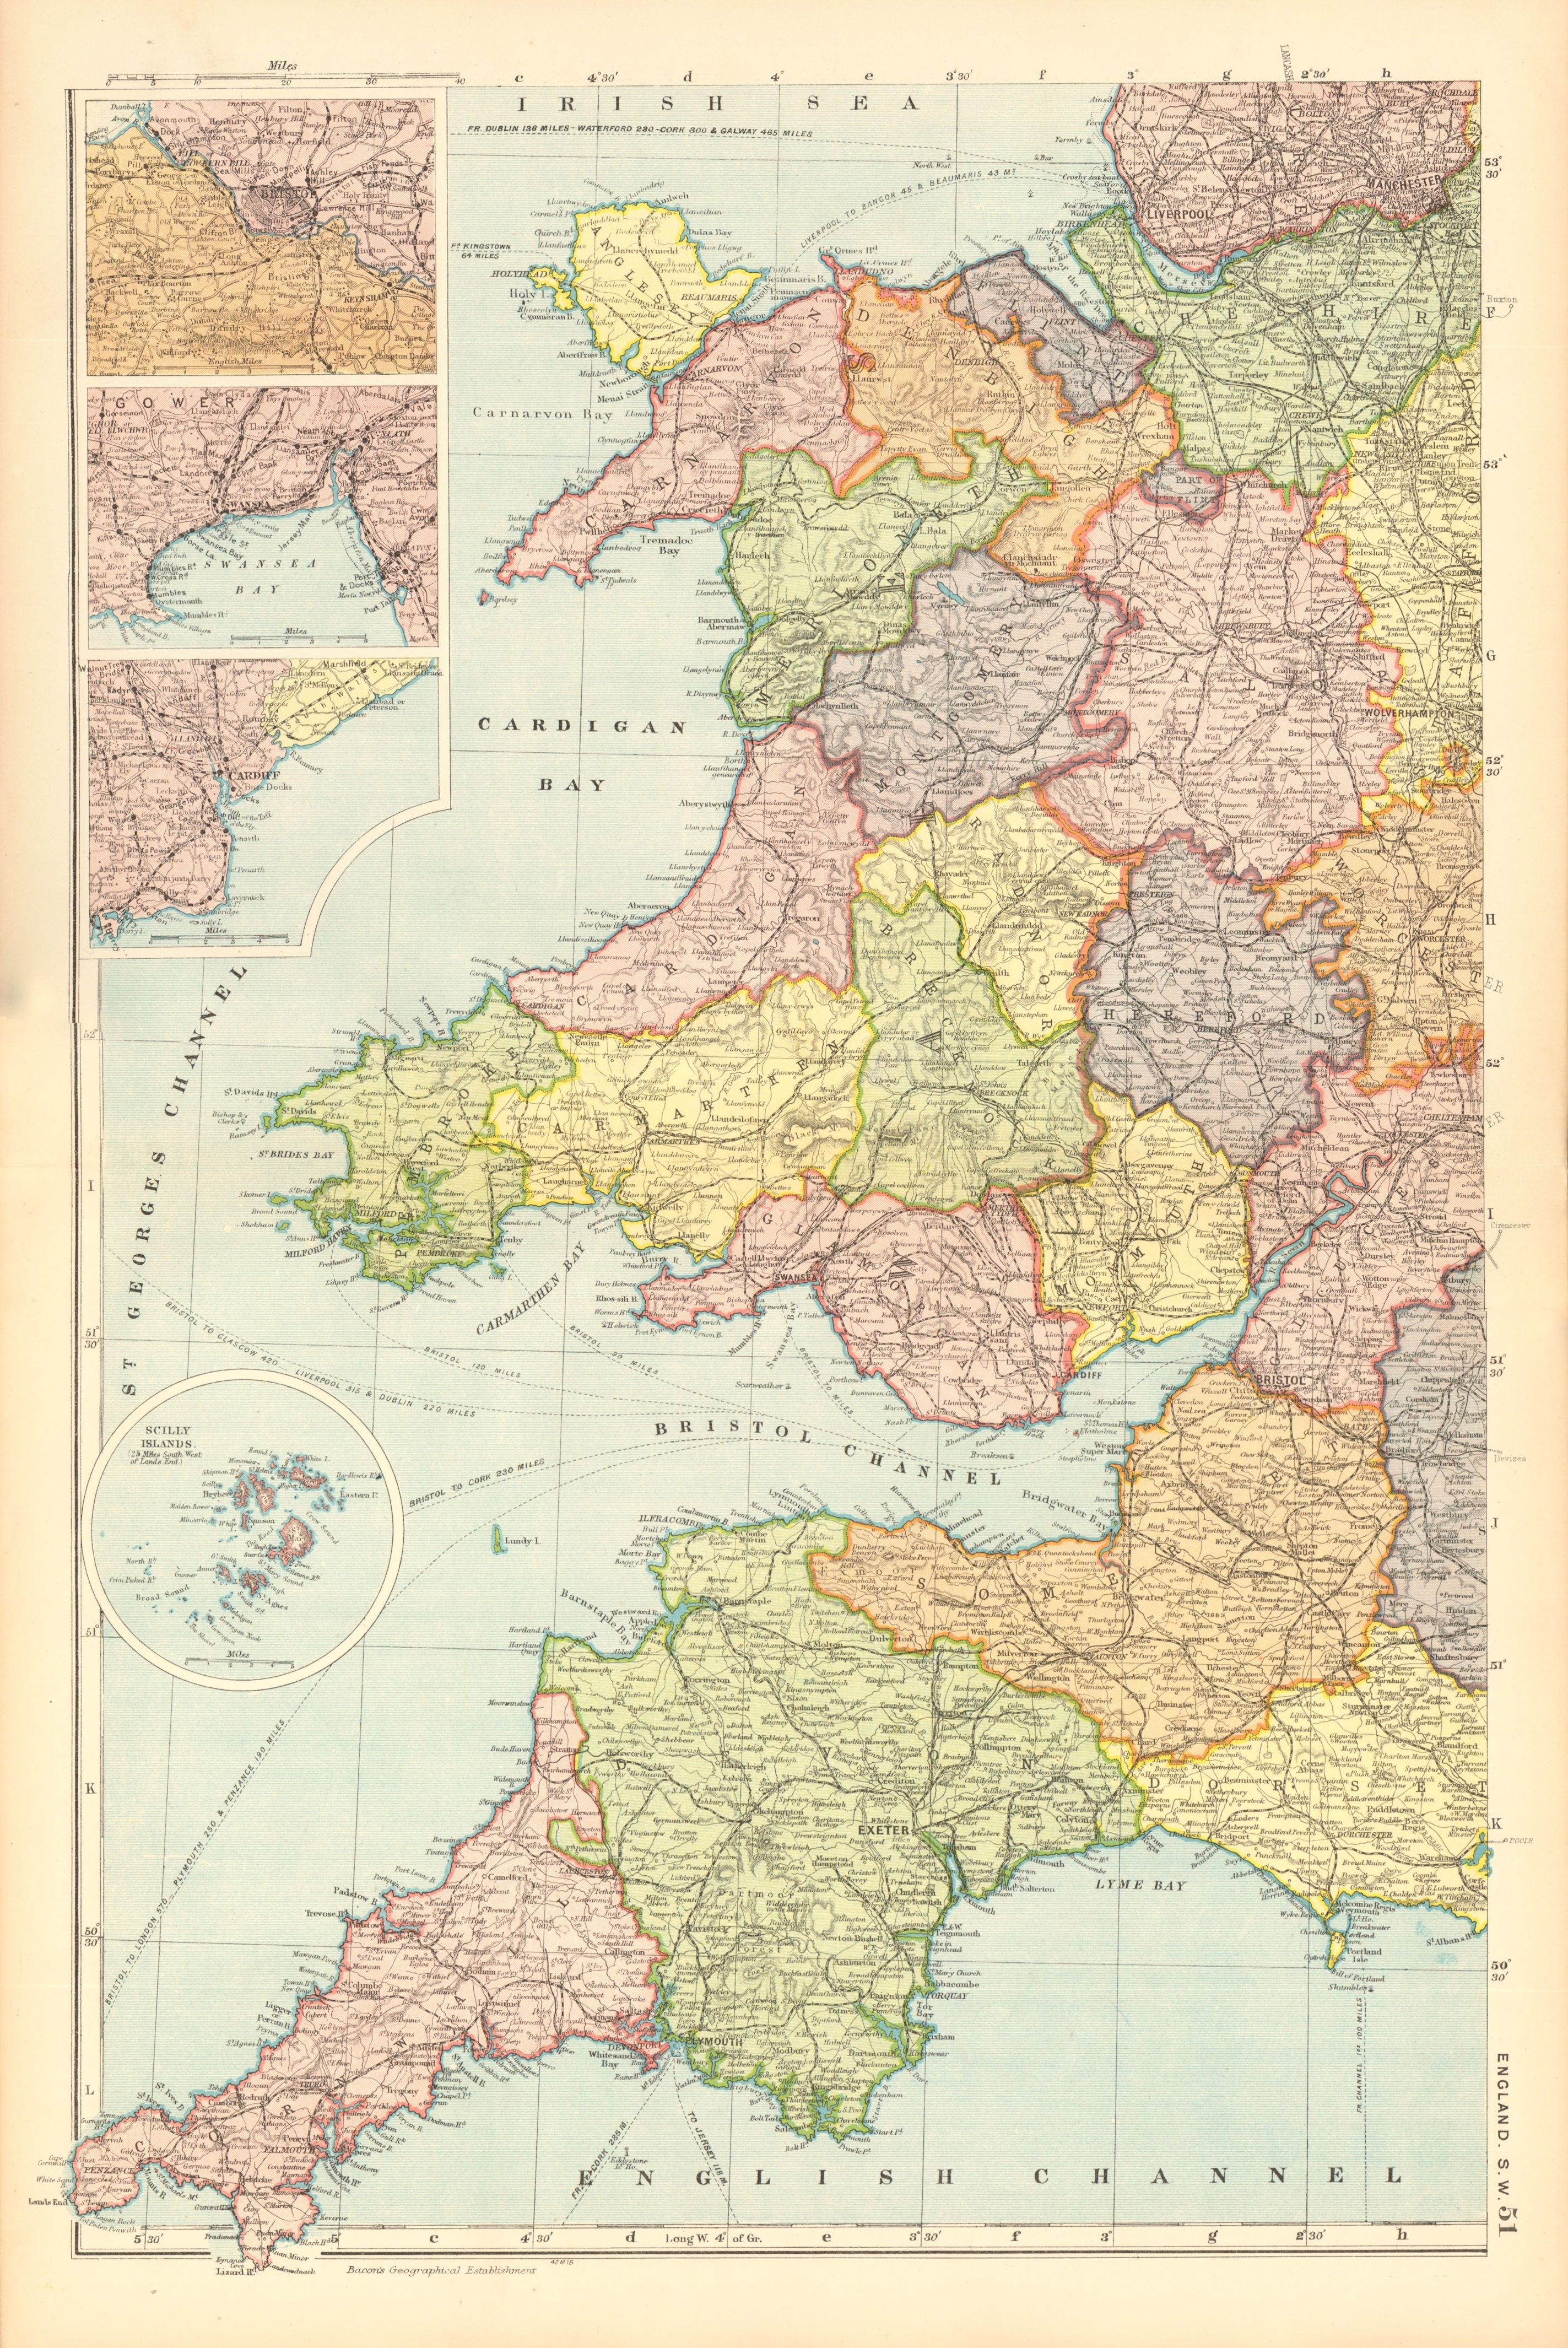 ENGLAND SOUTH WEST/WALES. Bristol Gower Cardiff environs.Railways.BACON 1904 map